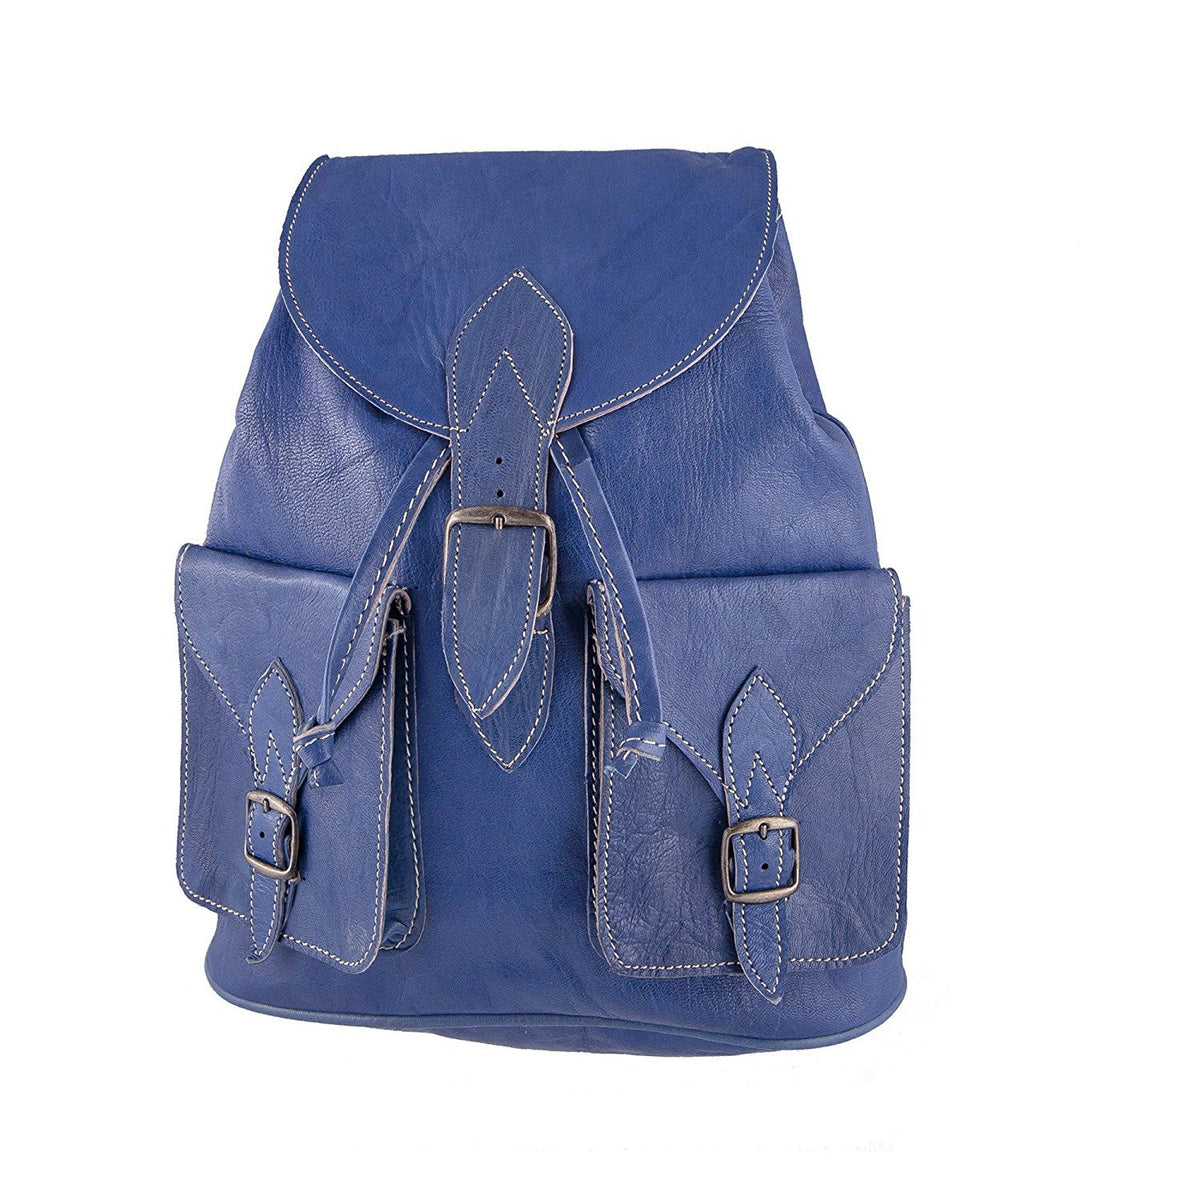 Vintage style women's leather backpack - Handmade - Blue